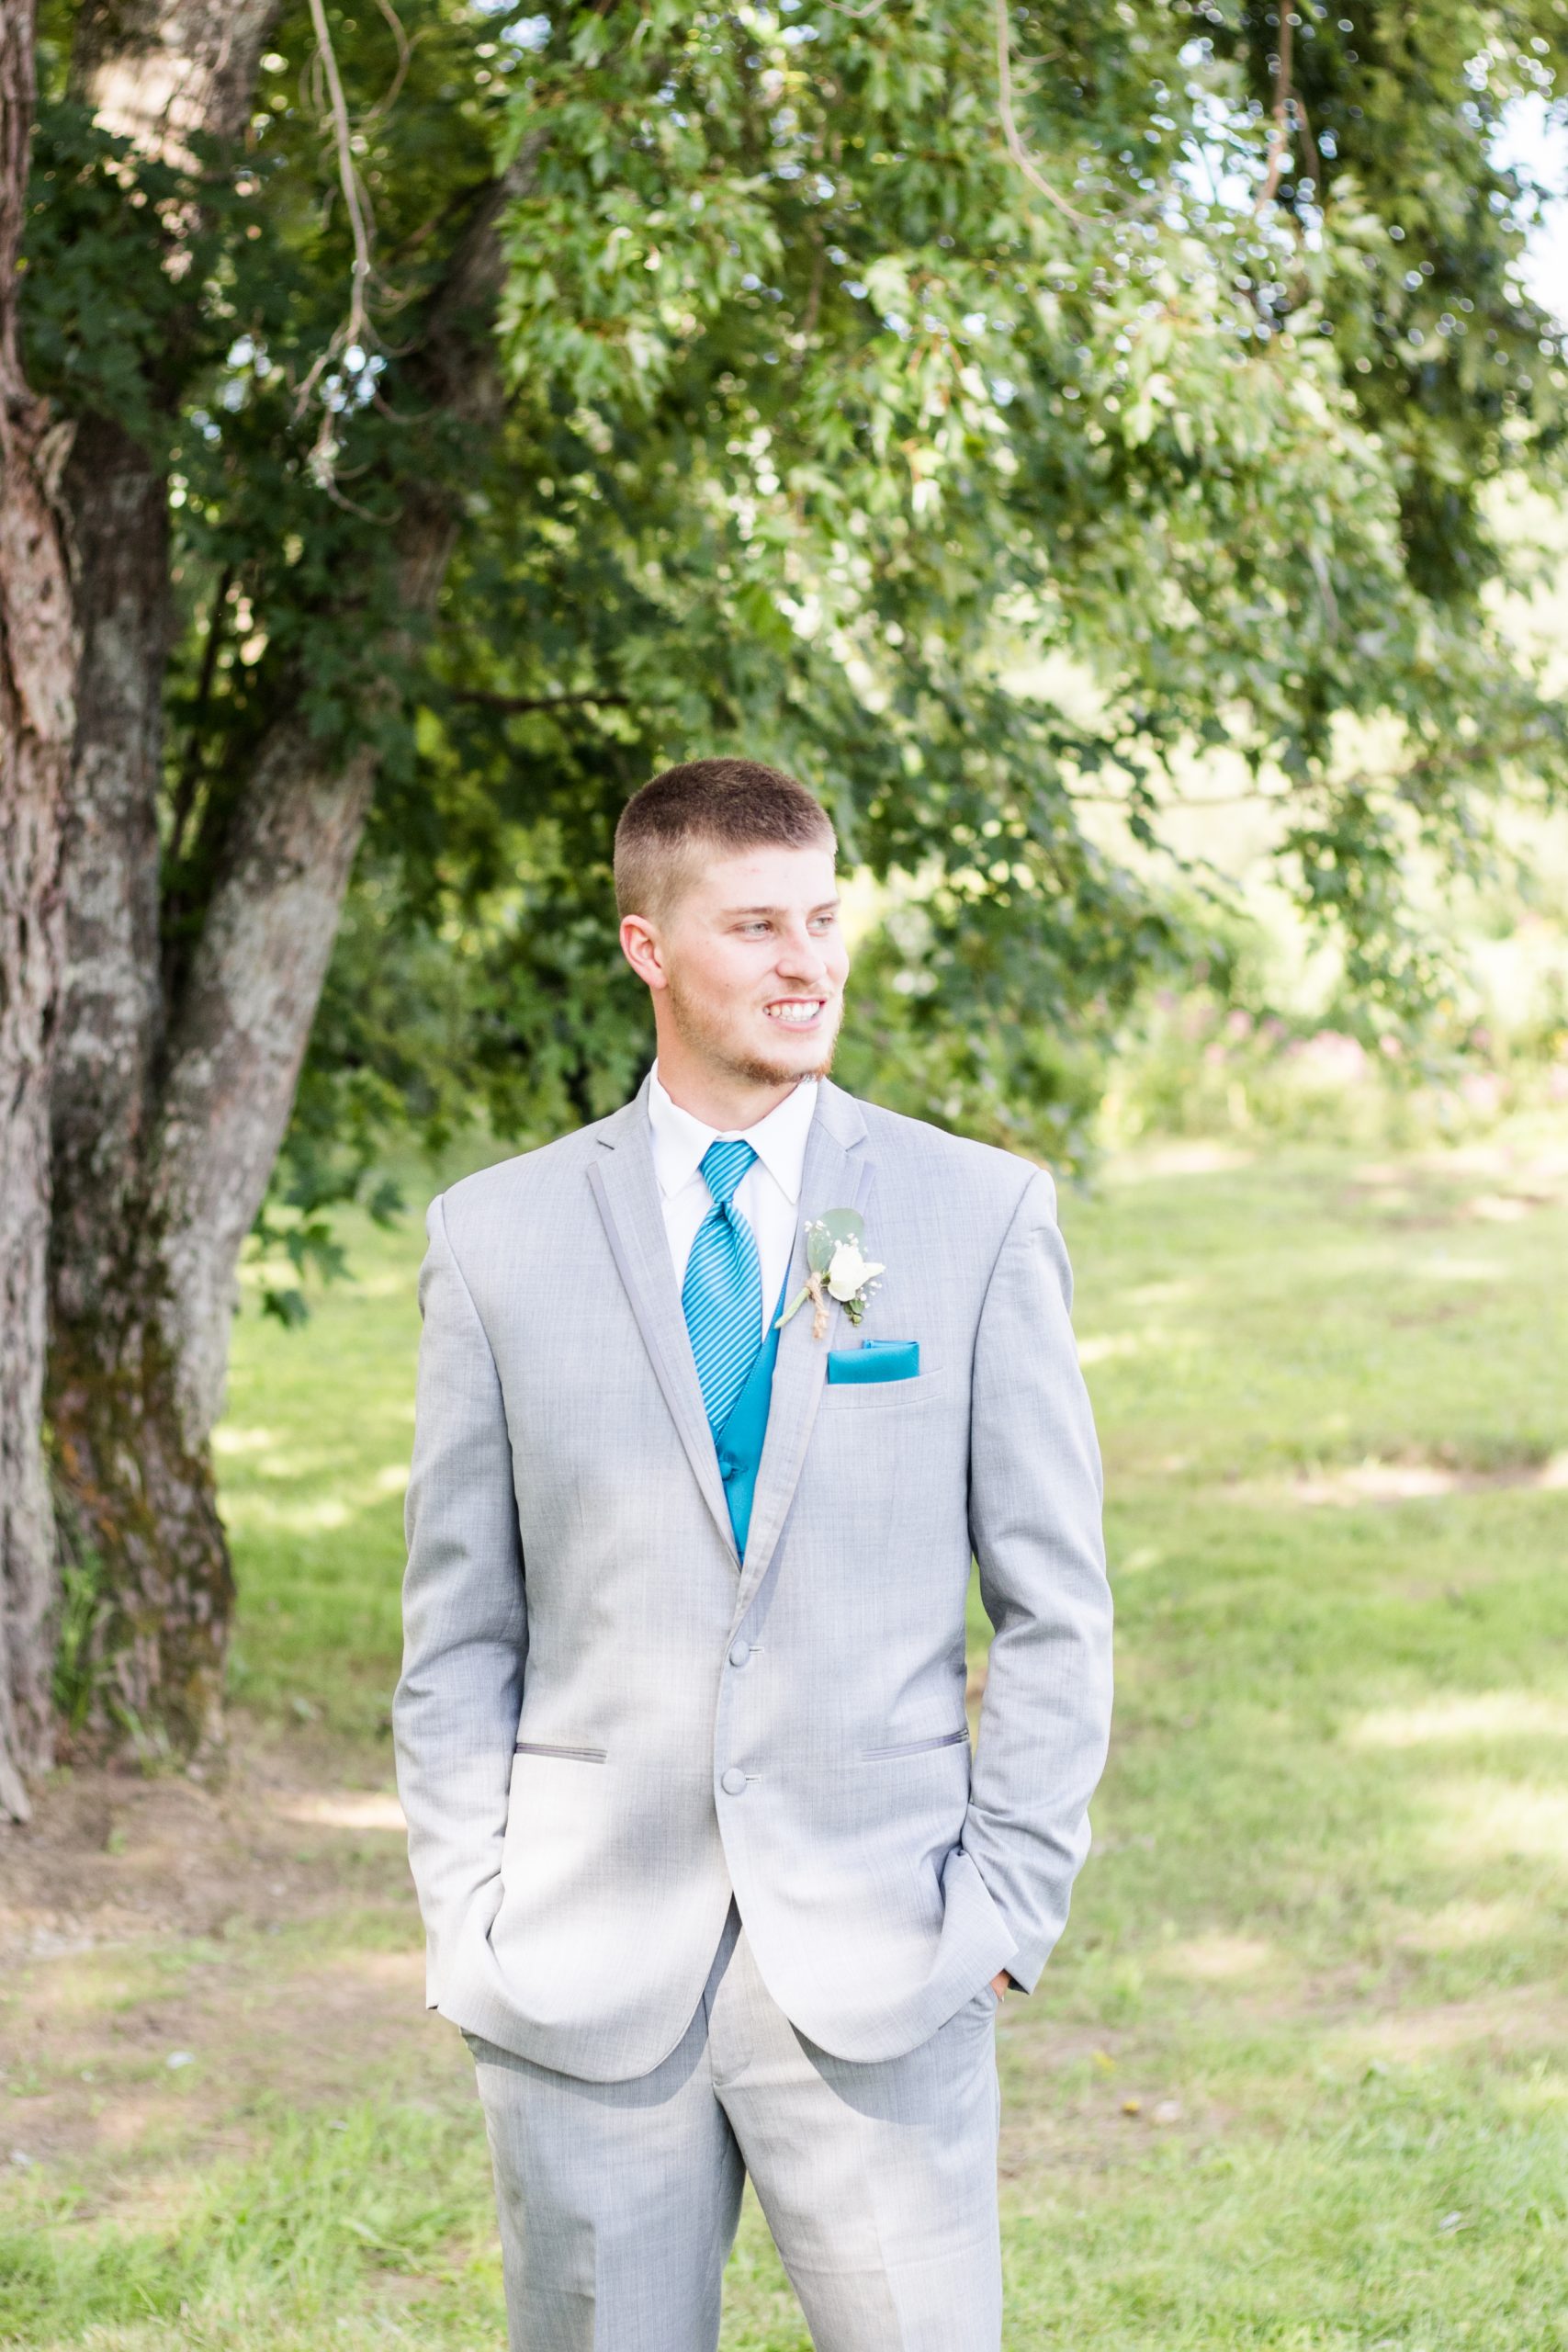 5 TIPS FOR THE GROOM ON HIS WEDDING DAY - elizabethbehanphotography.com